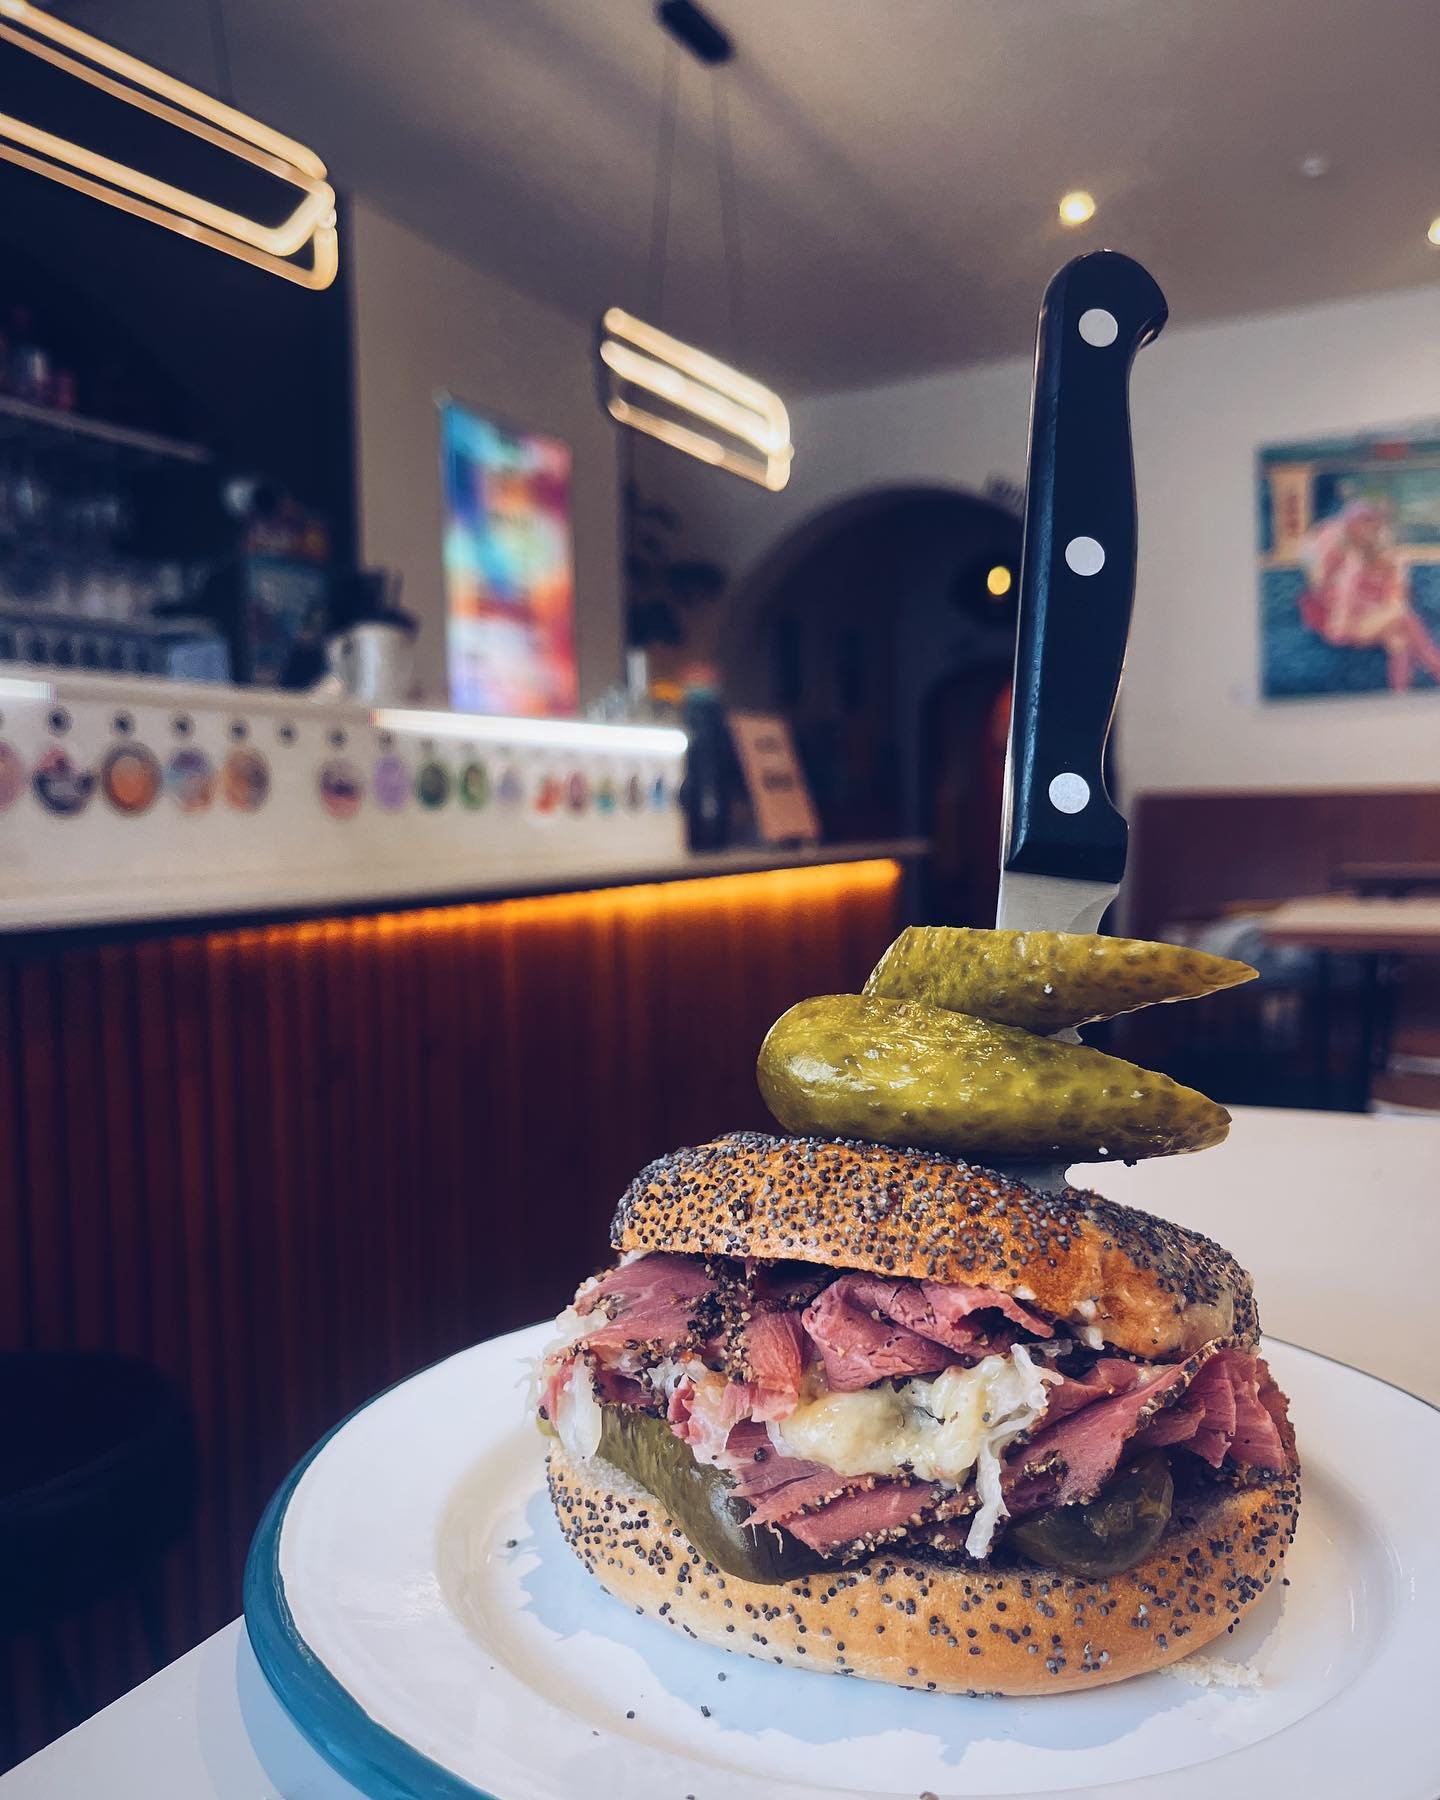 Couldn&rsquo;t resist this beautiful peppered Pastrami so we&rsquo;ve whacked some Reuben bagels on the specials this weekend.

Pastrami, sauerkraut, dill pickles, beer mustard cheese on a poppy seed bagel. Yes please. I&rsquo;ll take 10. 

We&rsquo;